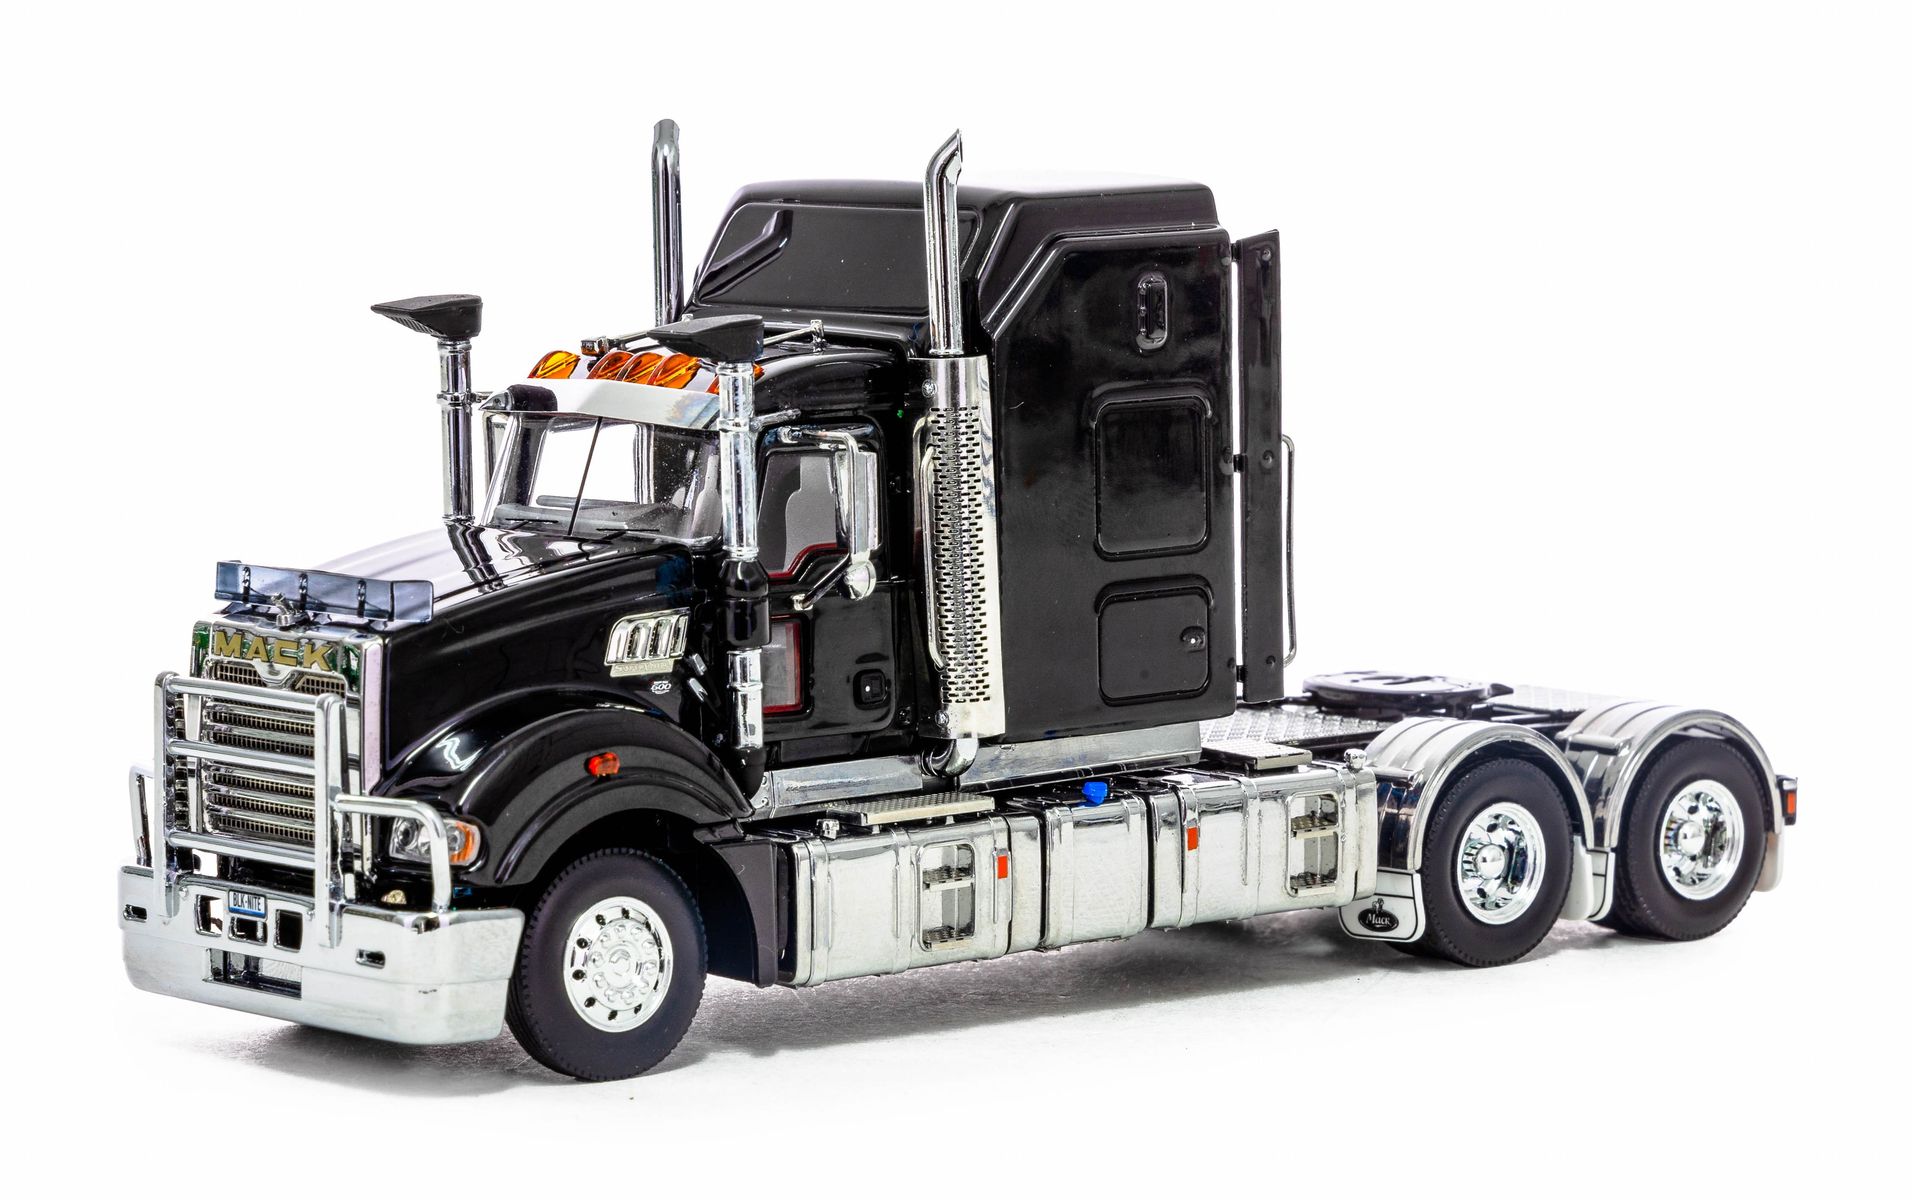 Product Image - Drake Collectibles Z01516 - Australian Mack Super-liner Prime Mover Truck 6x4 Late Edition Black - Scale 1:50